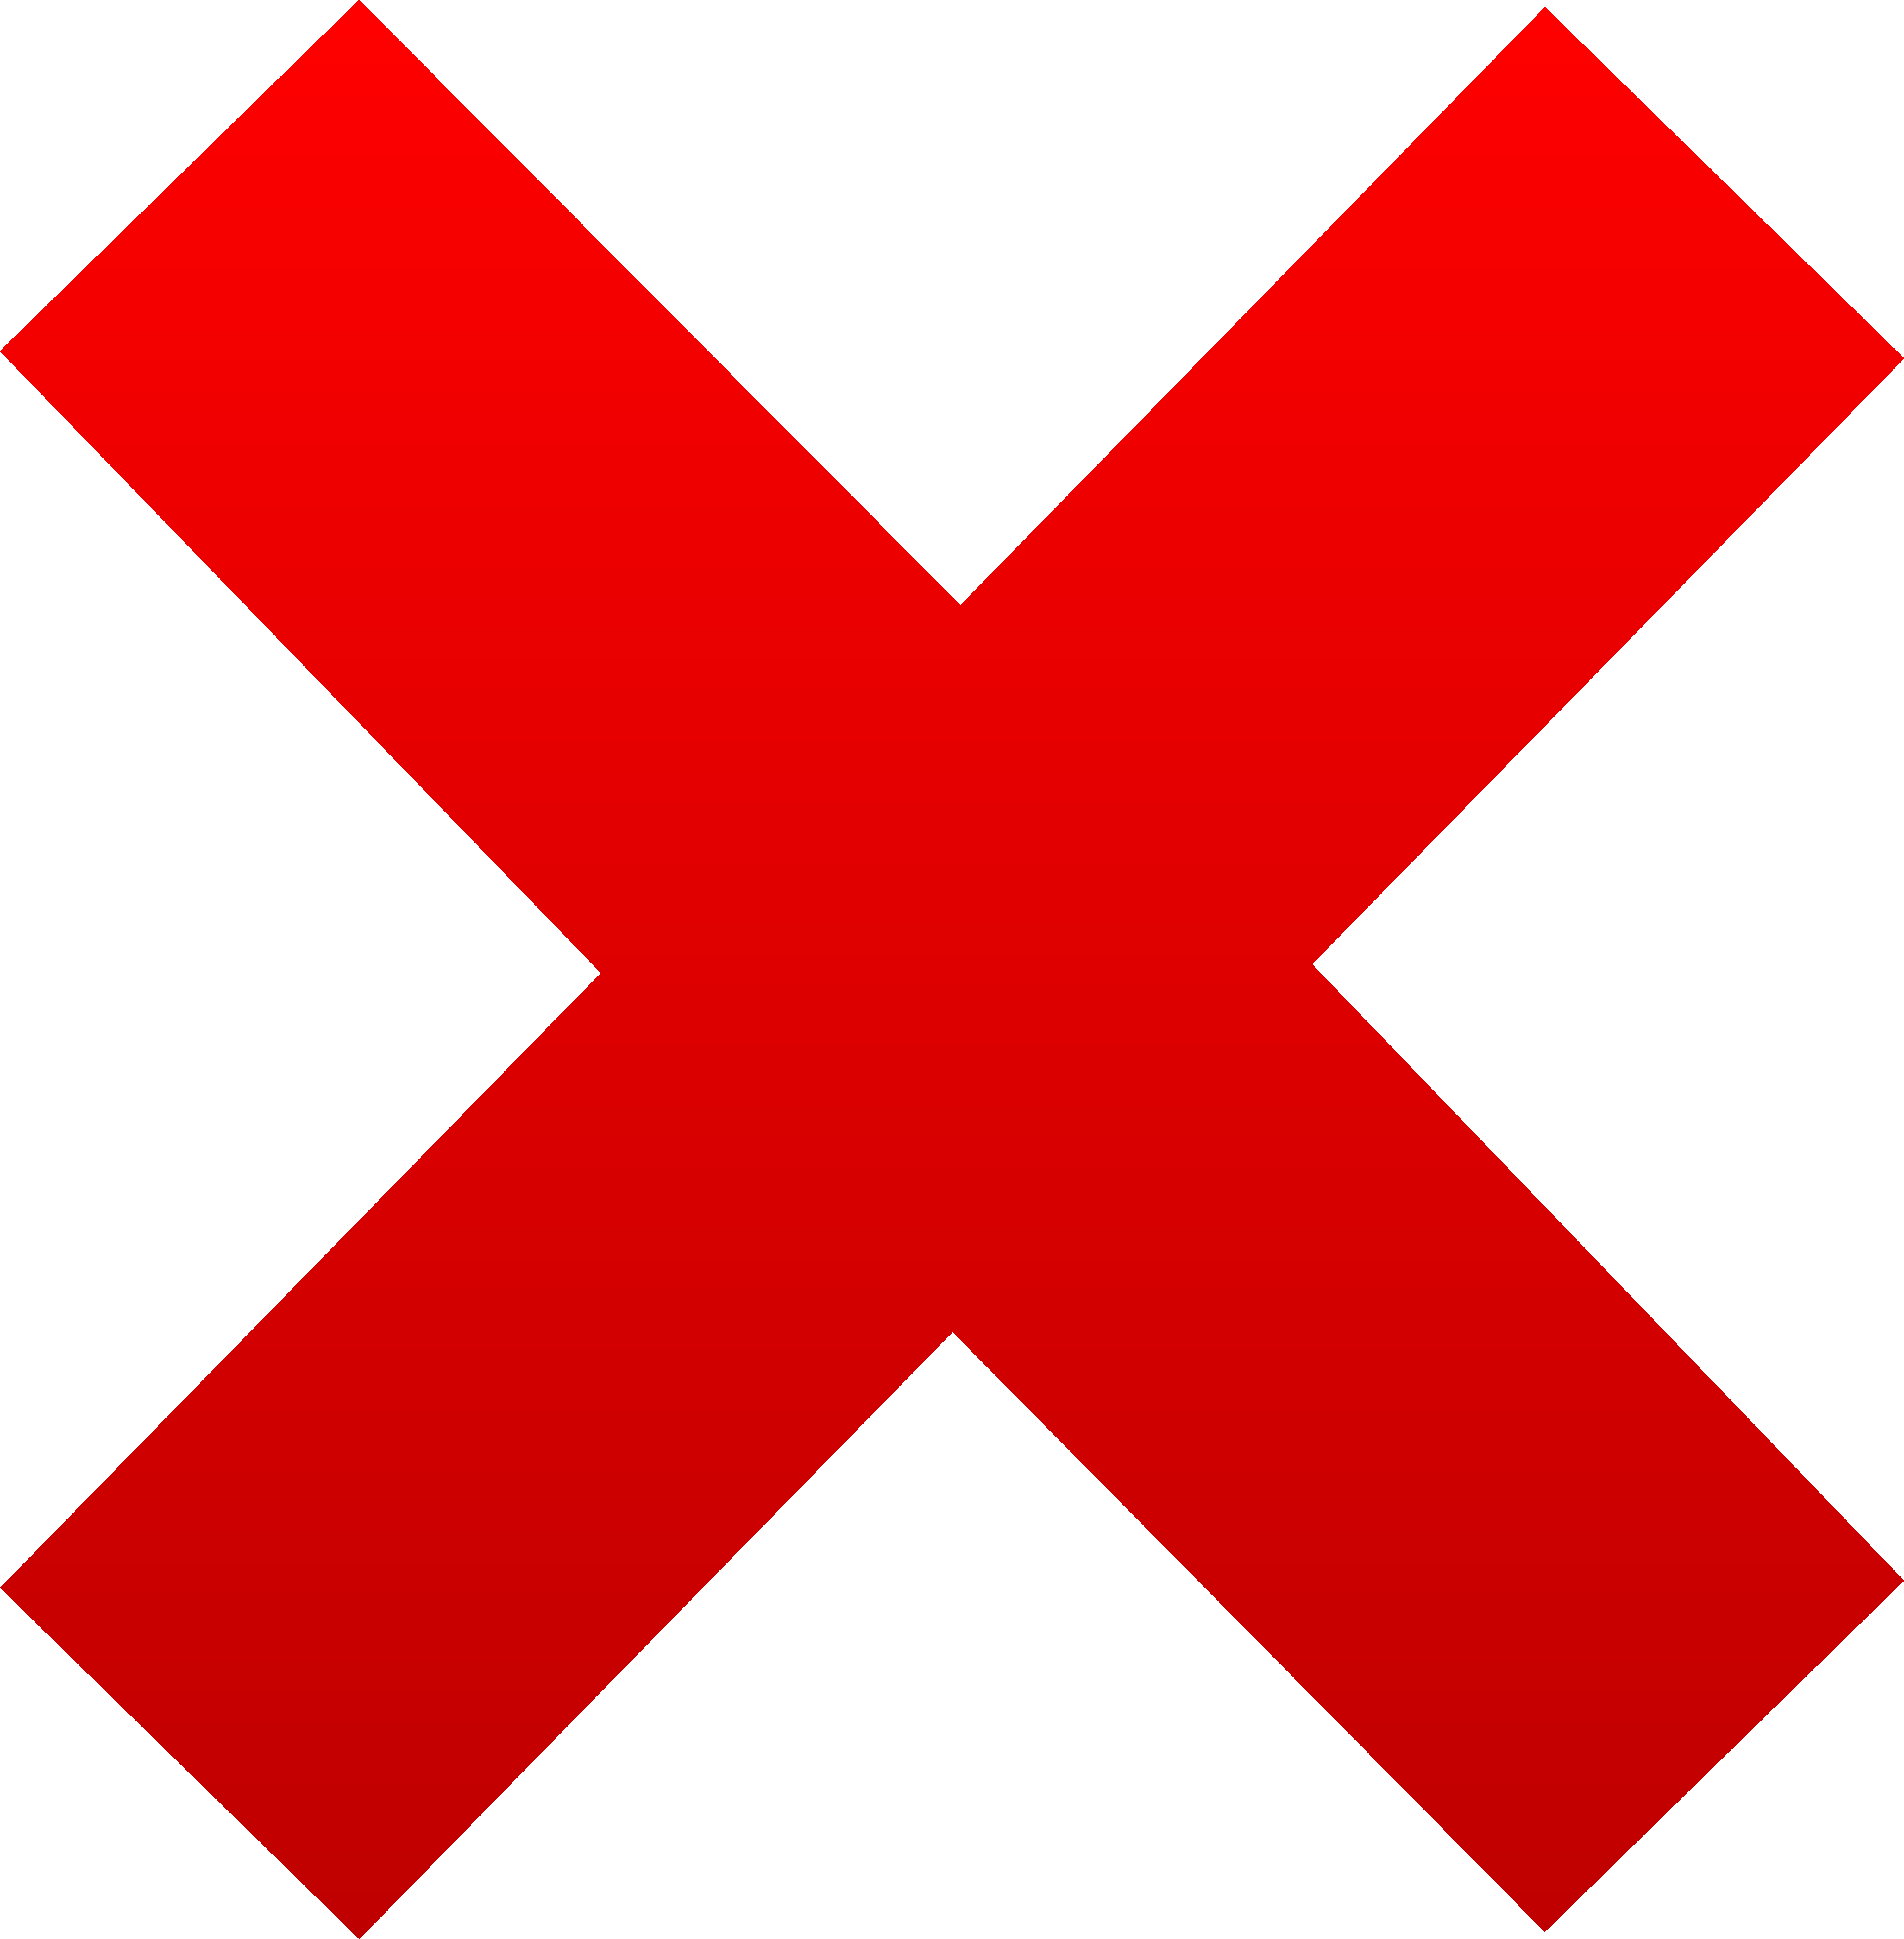 Red x clipart png